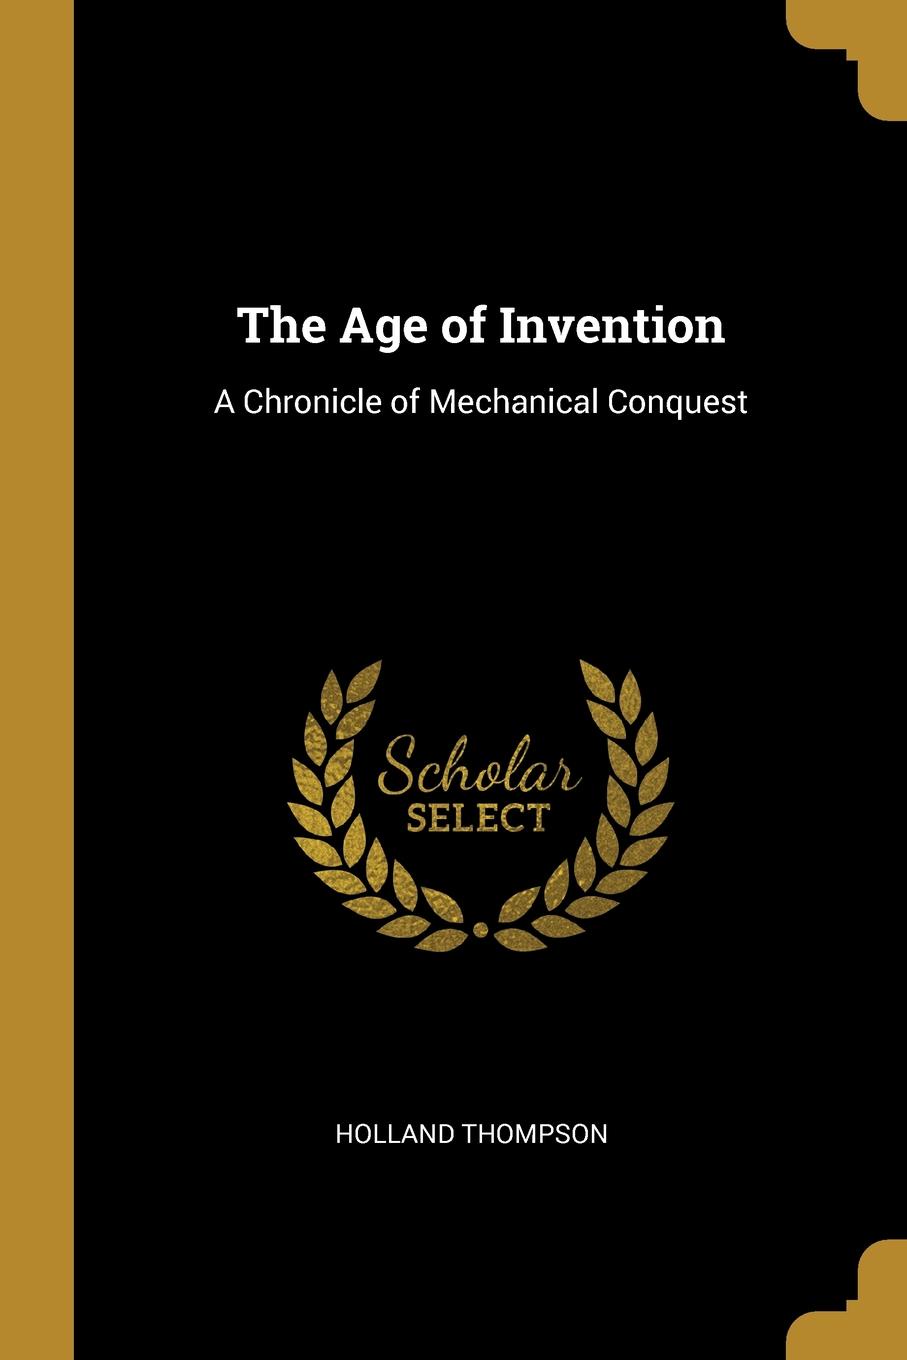 The Age of Invention. A Chronicle of Mechanical Conquest